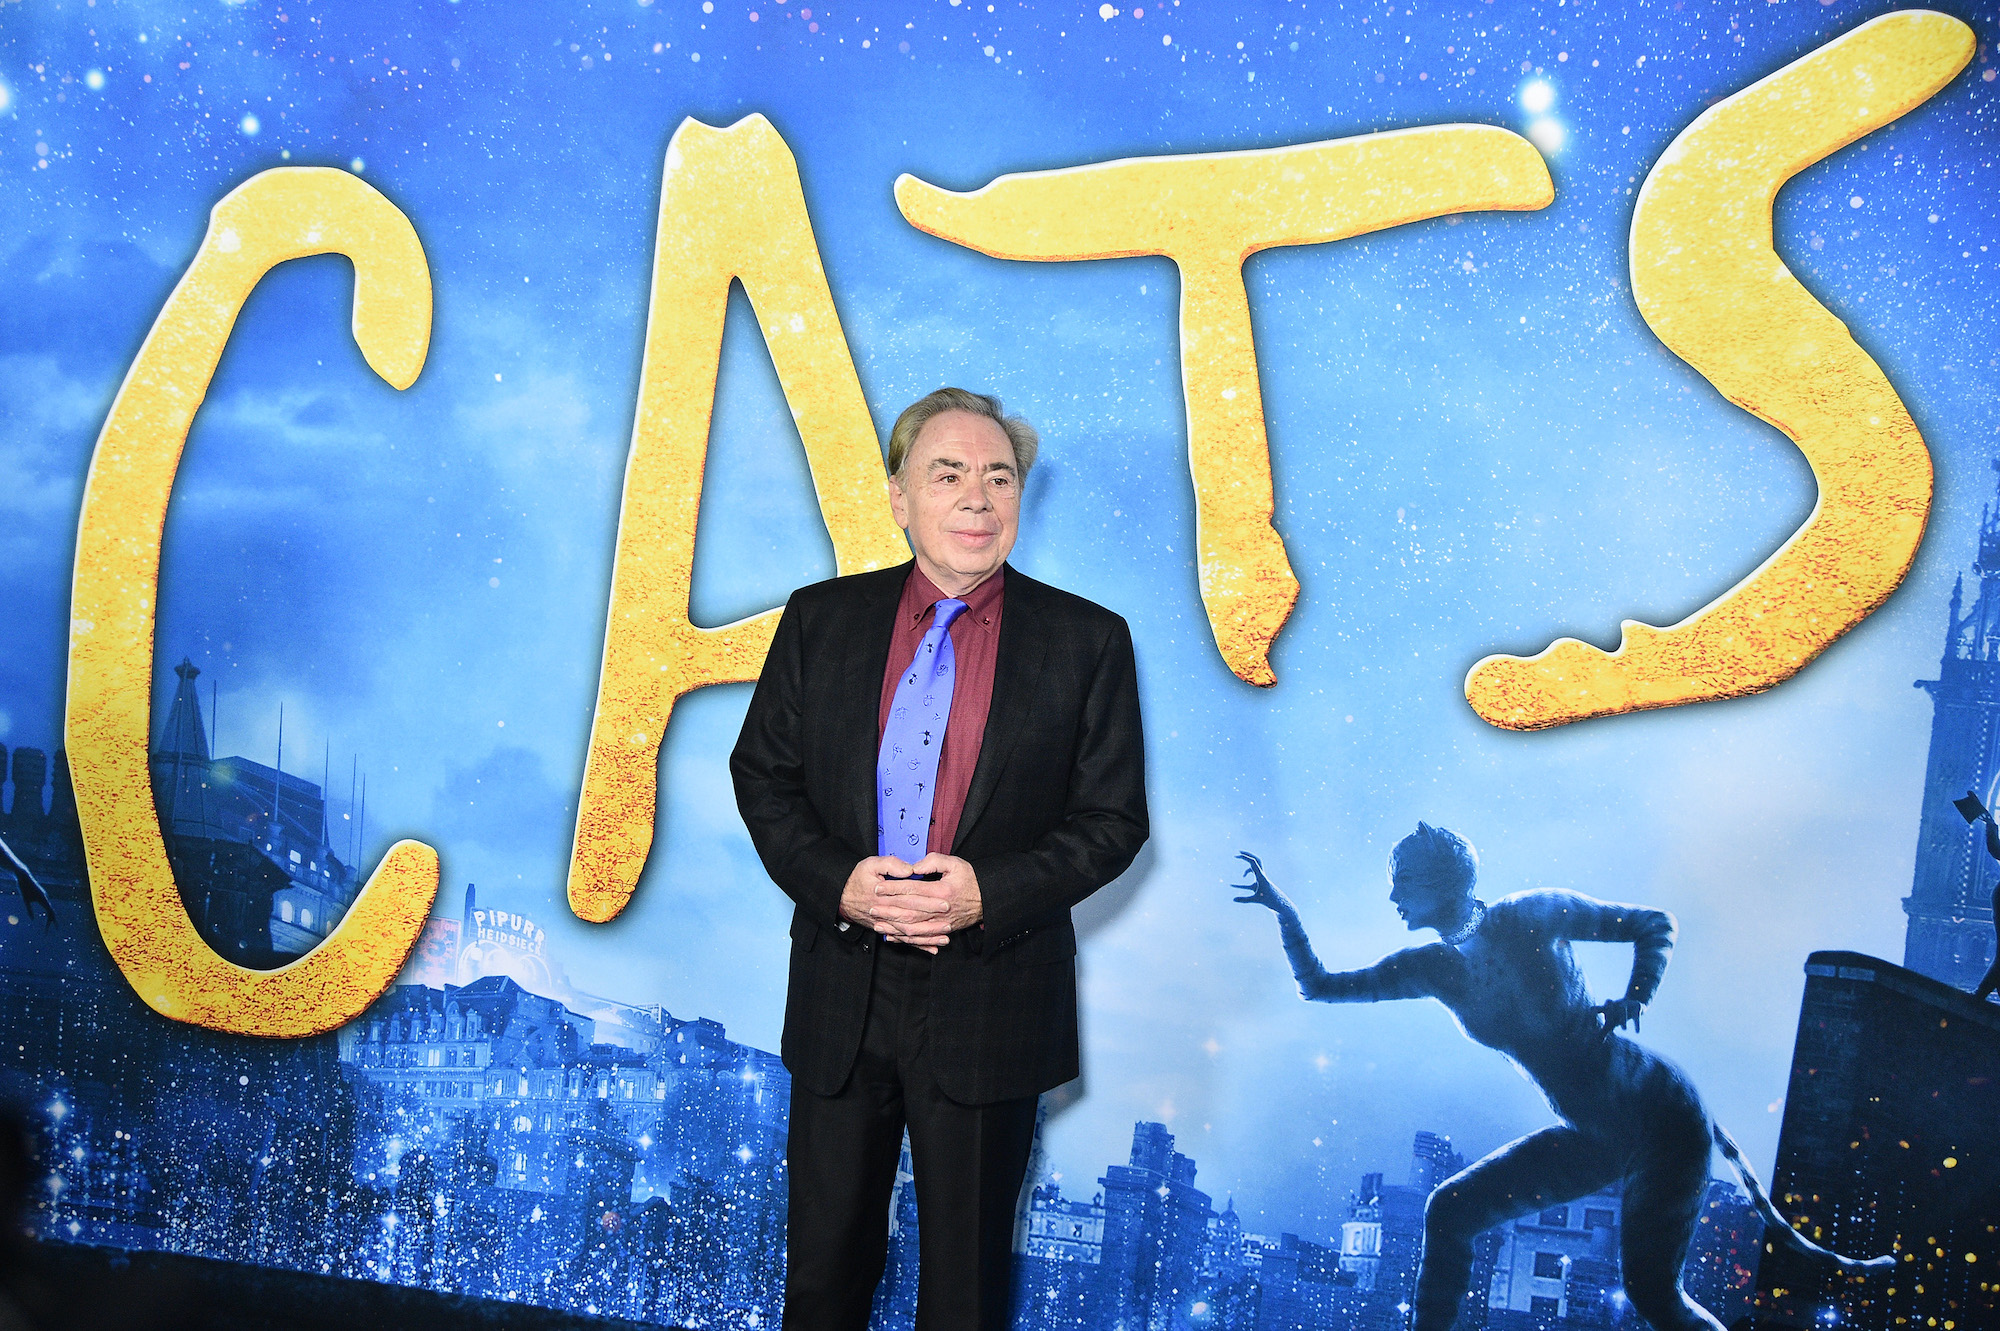 Andrew Lloyd Webber attends the 'Cats' world premiere in New York City in 2019. He poses for photos in a black suit with a red shirt and blue tie and his hands clasped. Behind him is a large blue backdrop that says 'CATS' in big yellow letters.